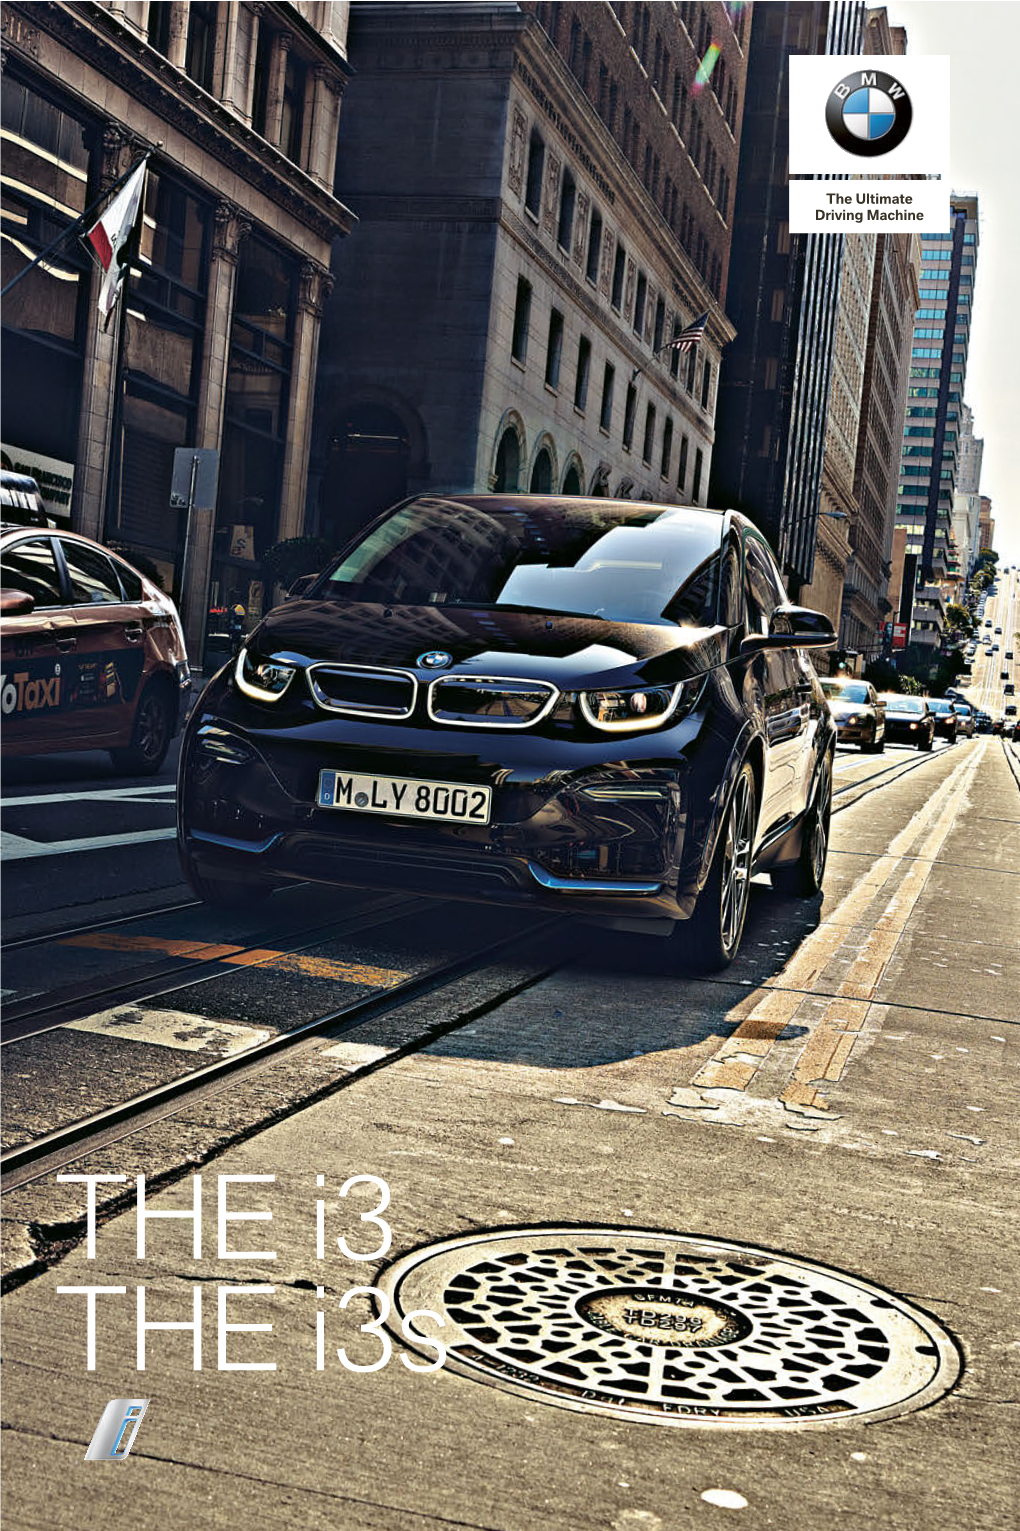 THE I3 the I3s the BMW I3 and I3s